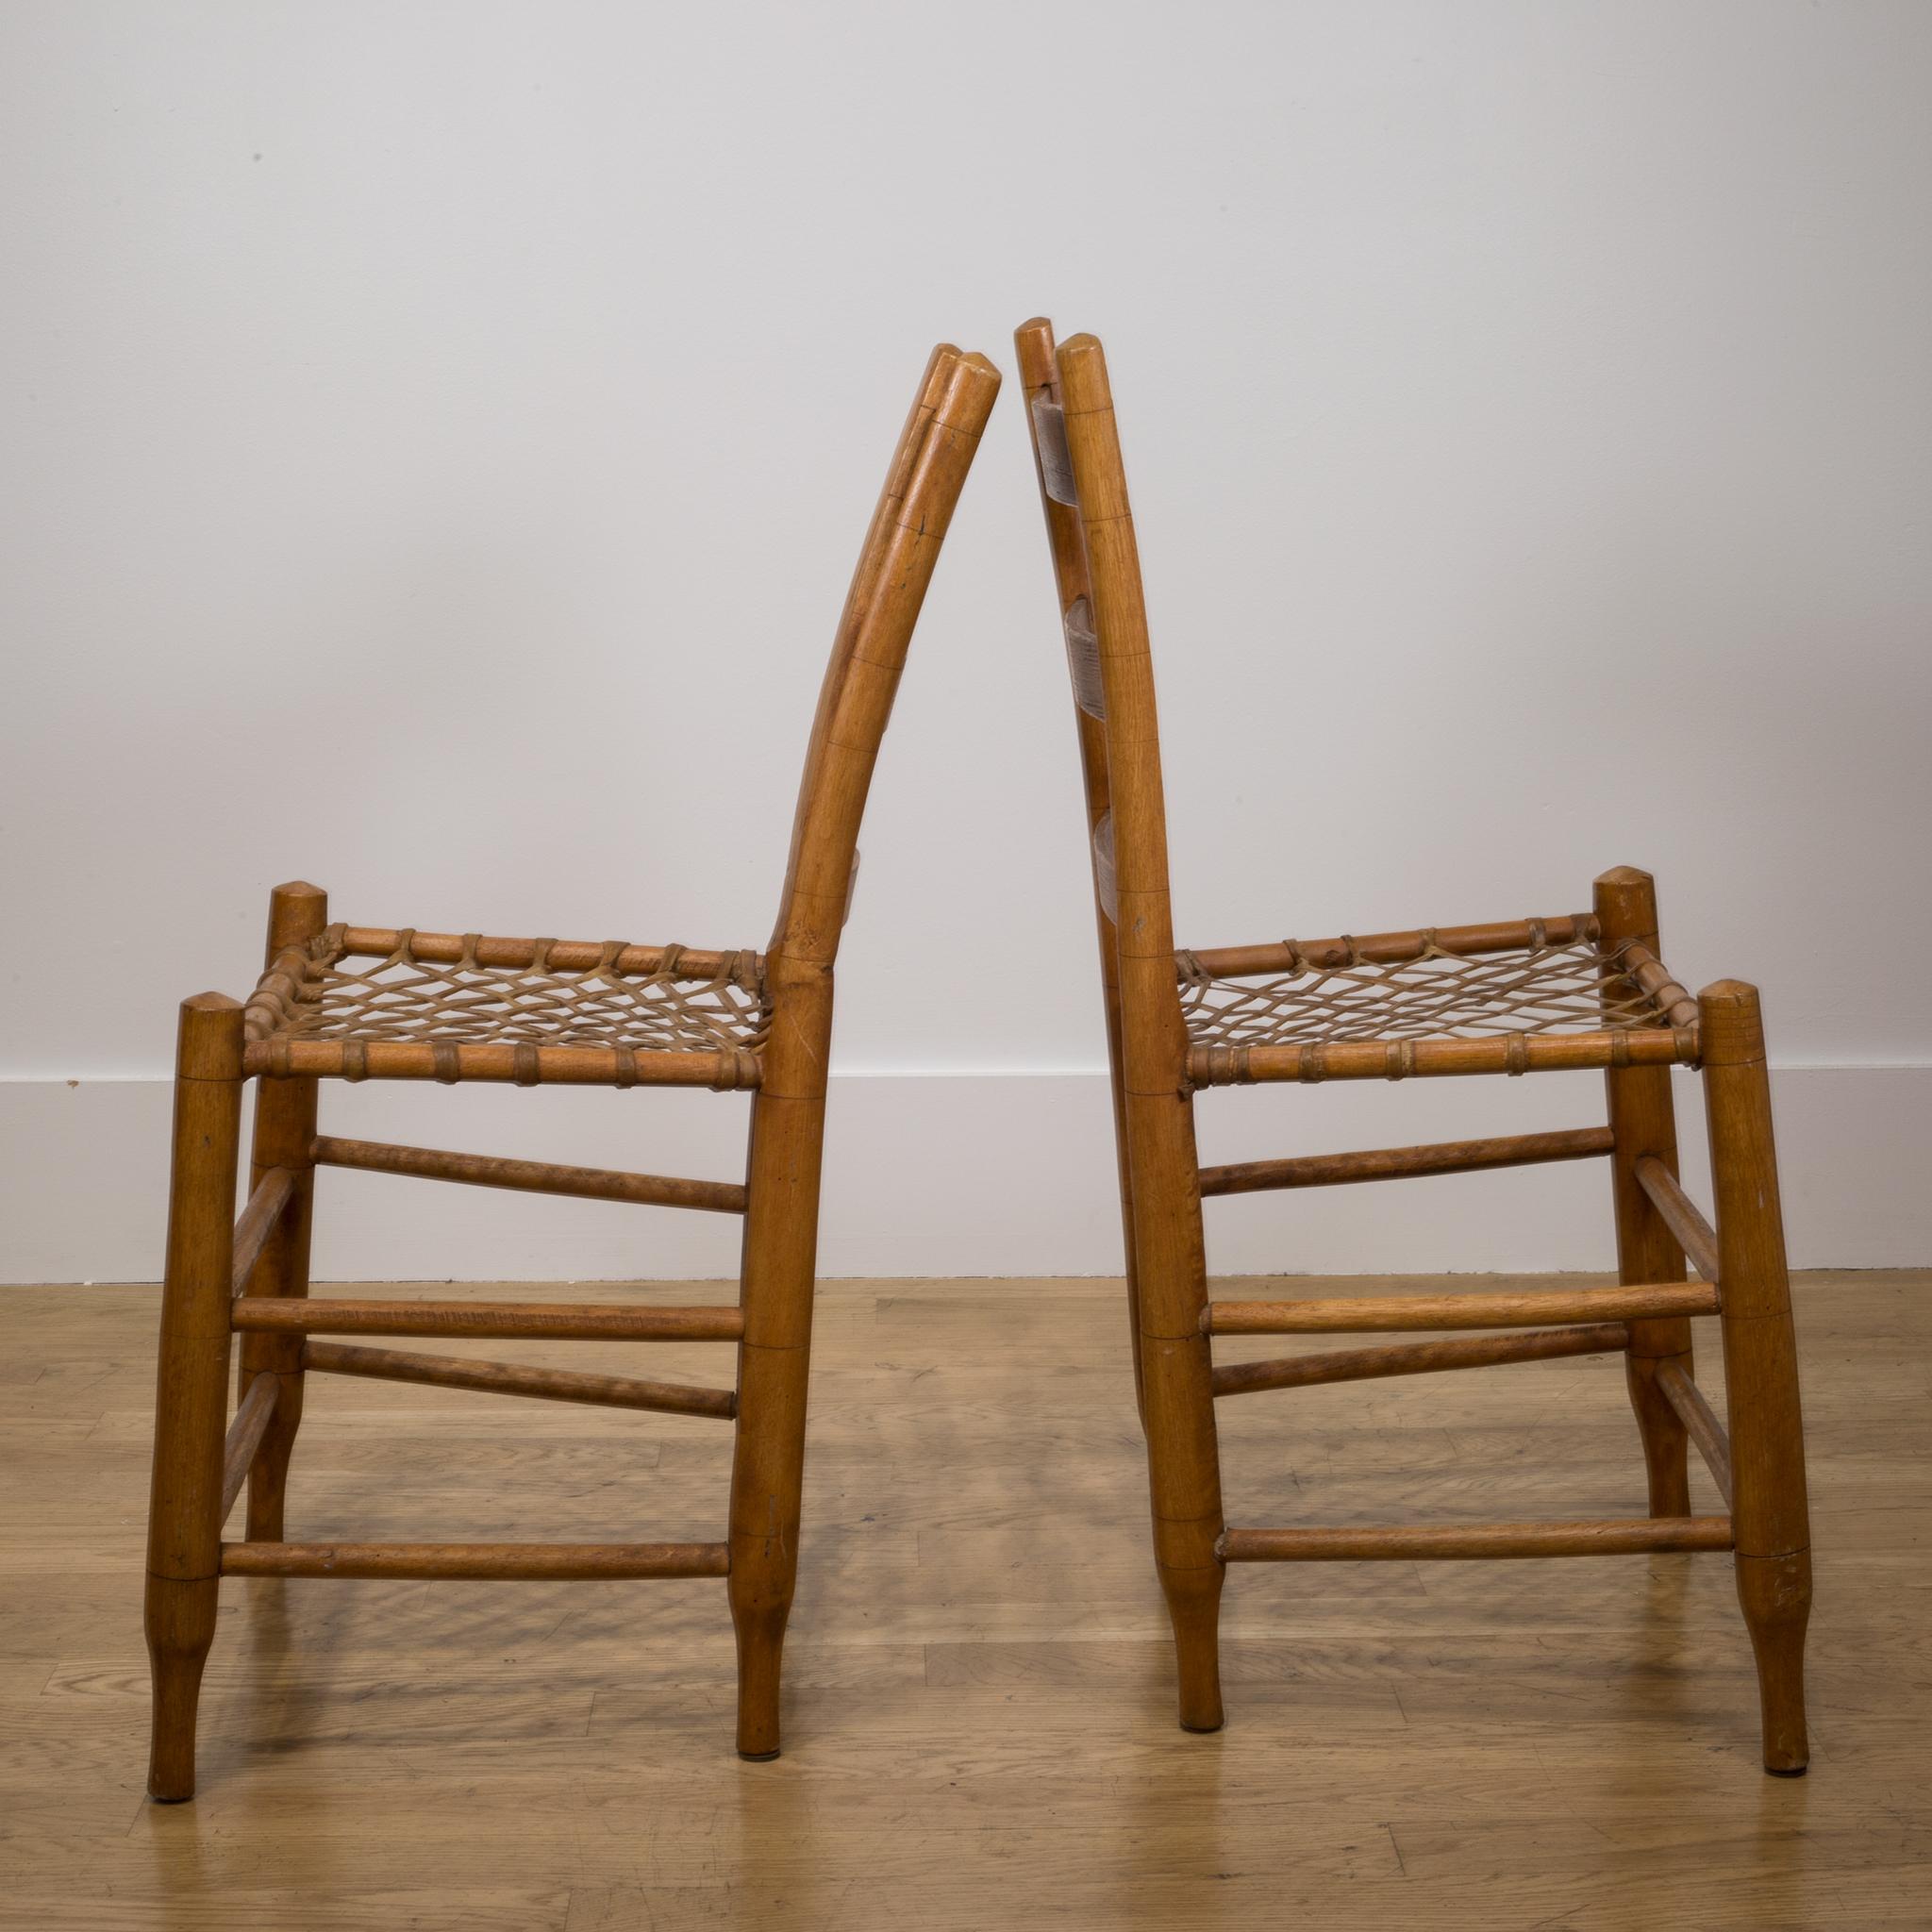 19th Century Rawhide Chairs from Historic Oregon Commune, circa 1856 4